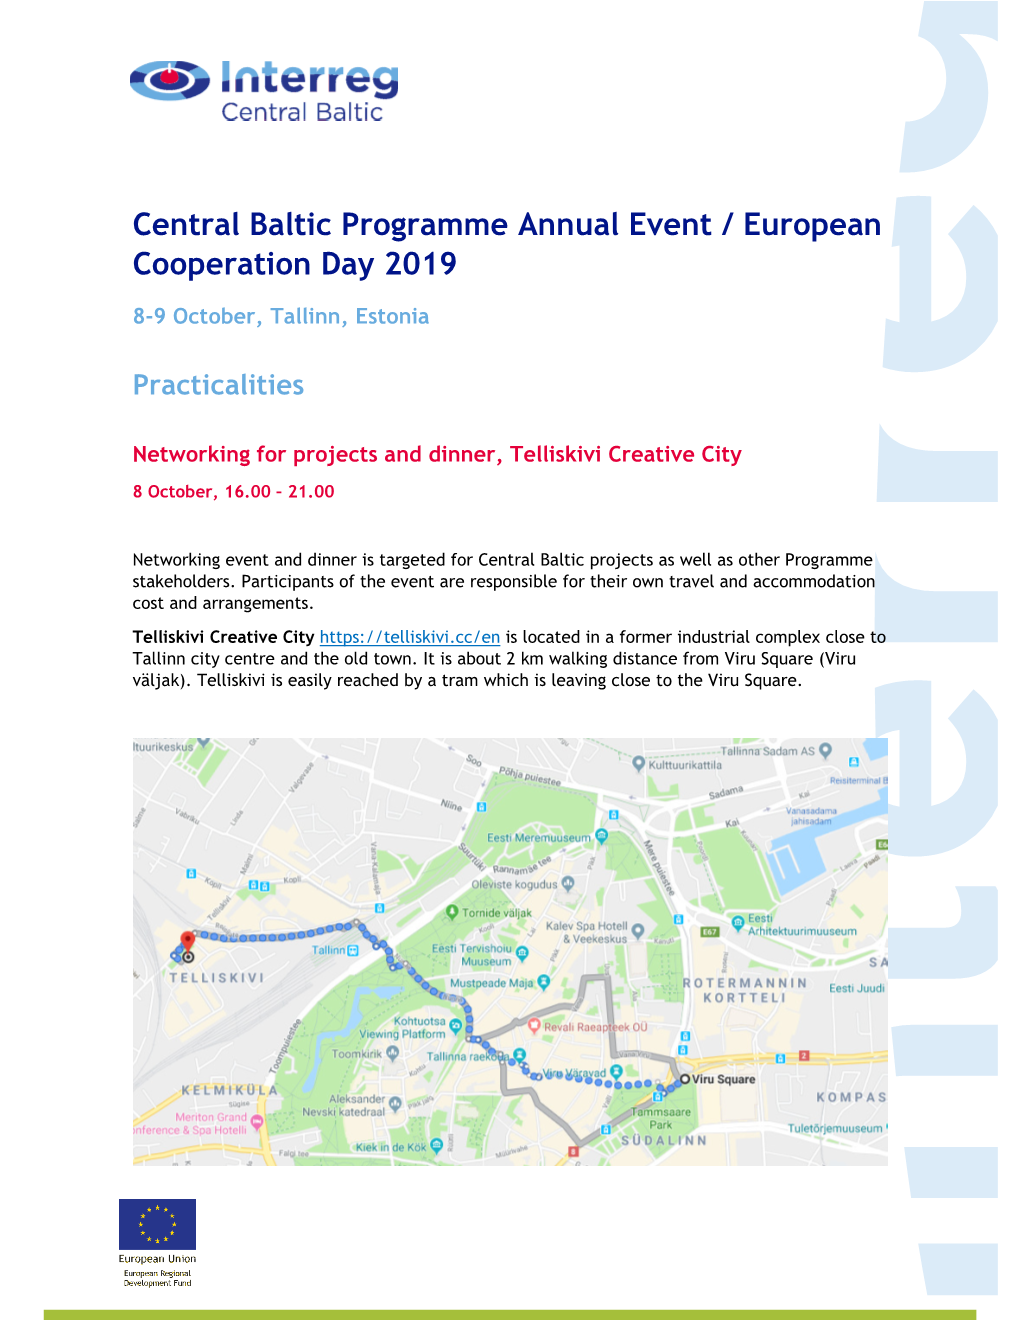 Central Baltic Programme Annual Event / European Cooperation Day 2019